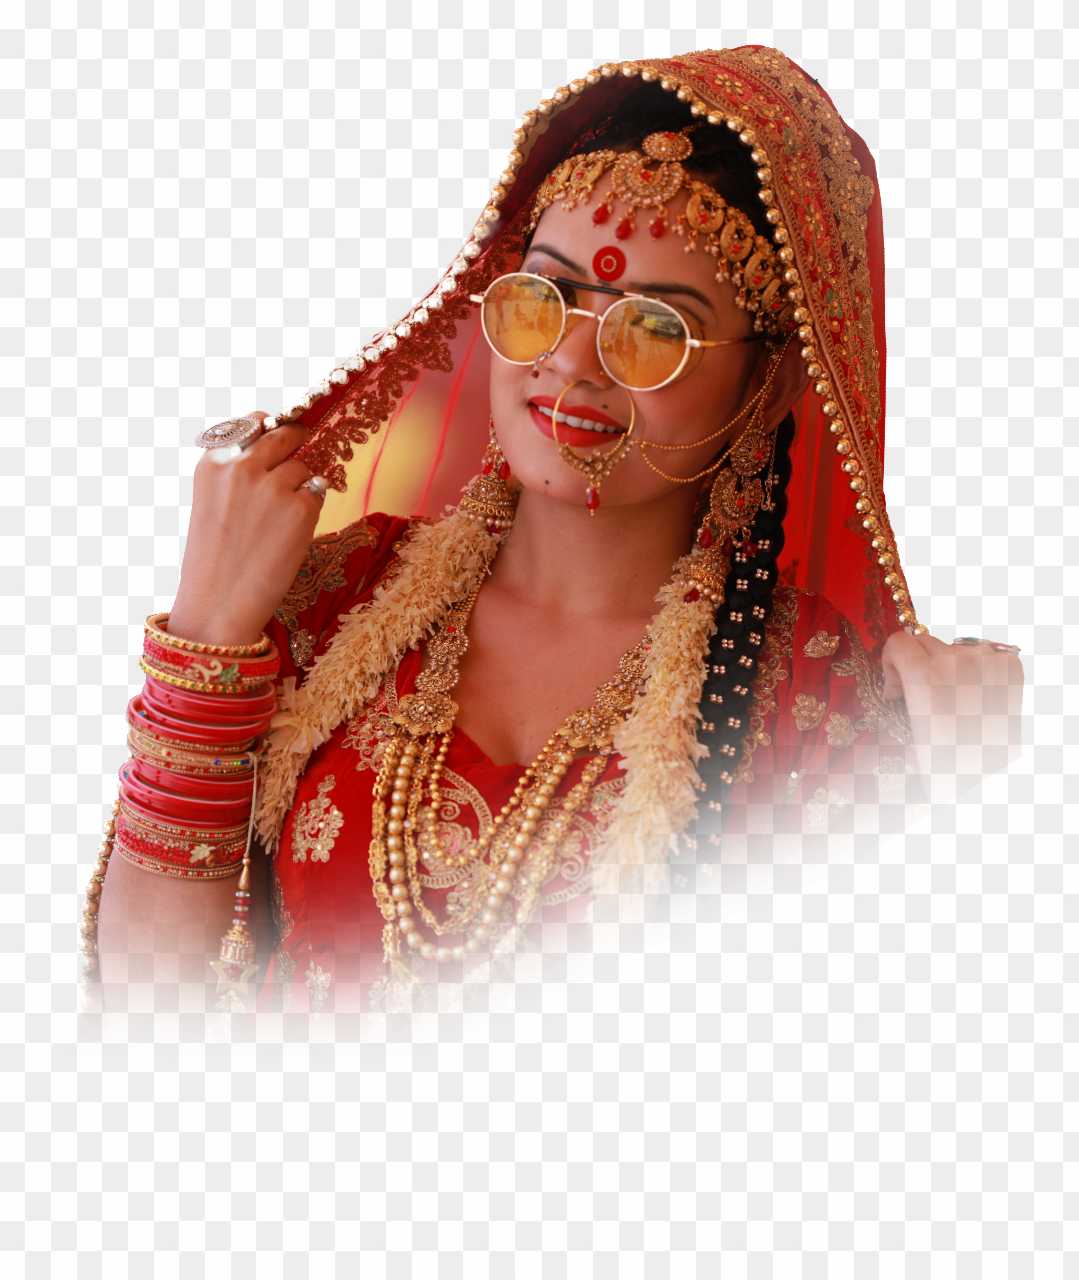 Indian wedding girl png images